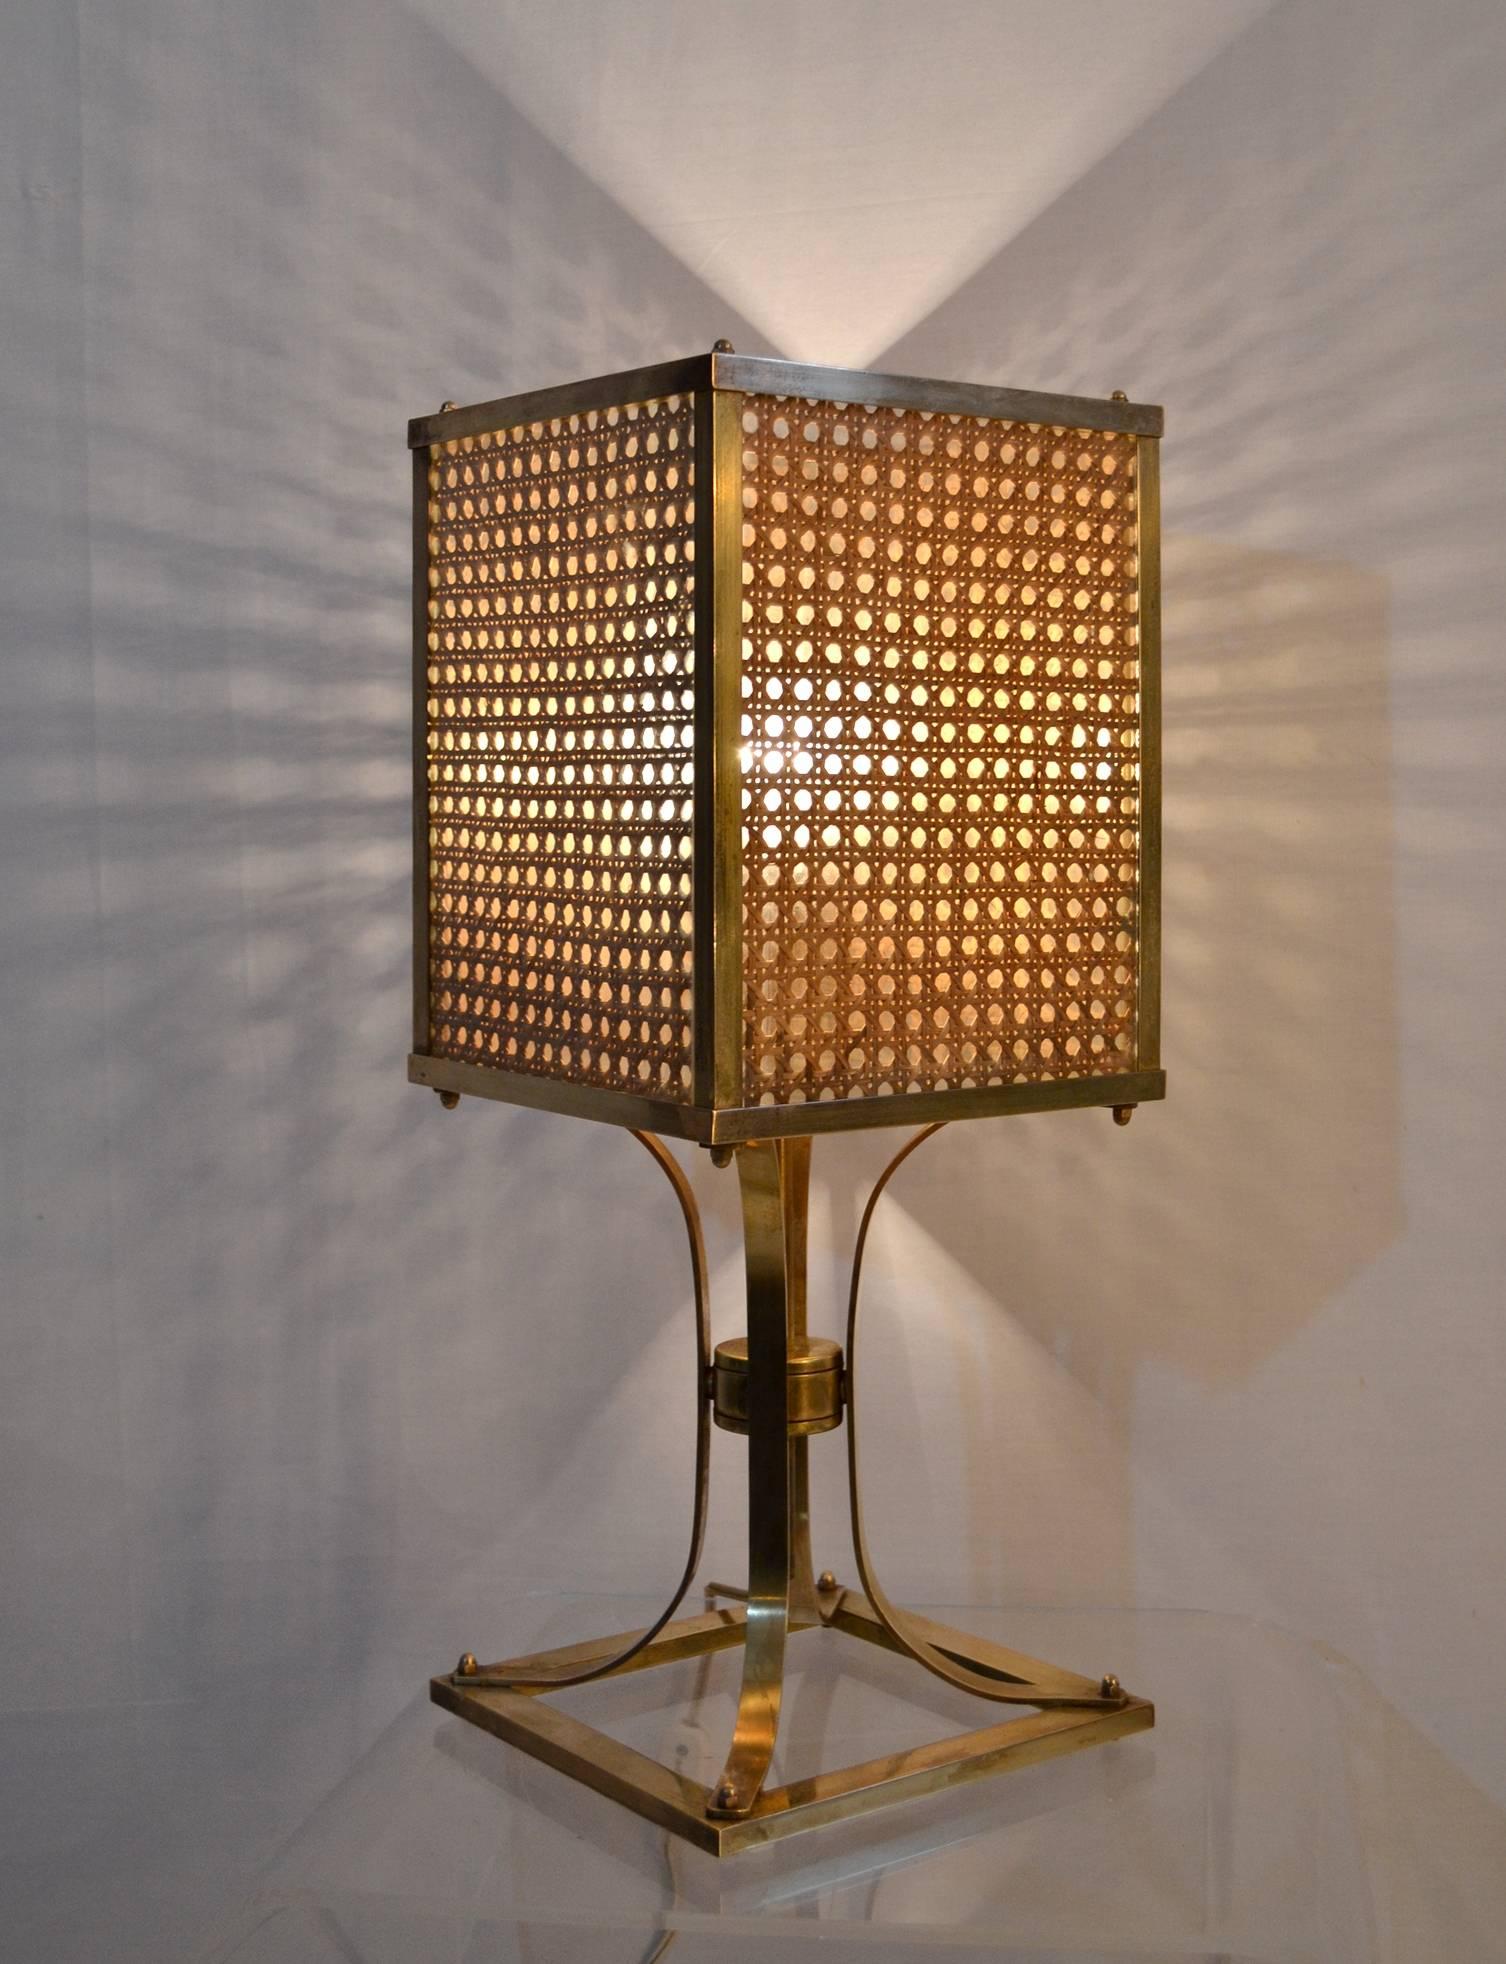 Rare table lamp in brass and rattan in the manner of Gabriella Crespi. The rattan is pressed beteween two folds of glass on each side and framed by brass. When lit it gives a very nice reflection and warmt.